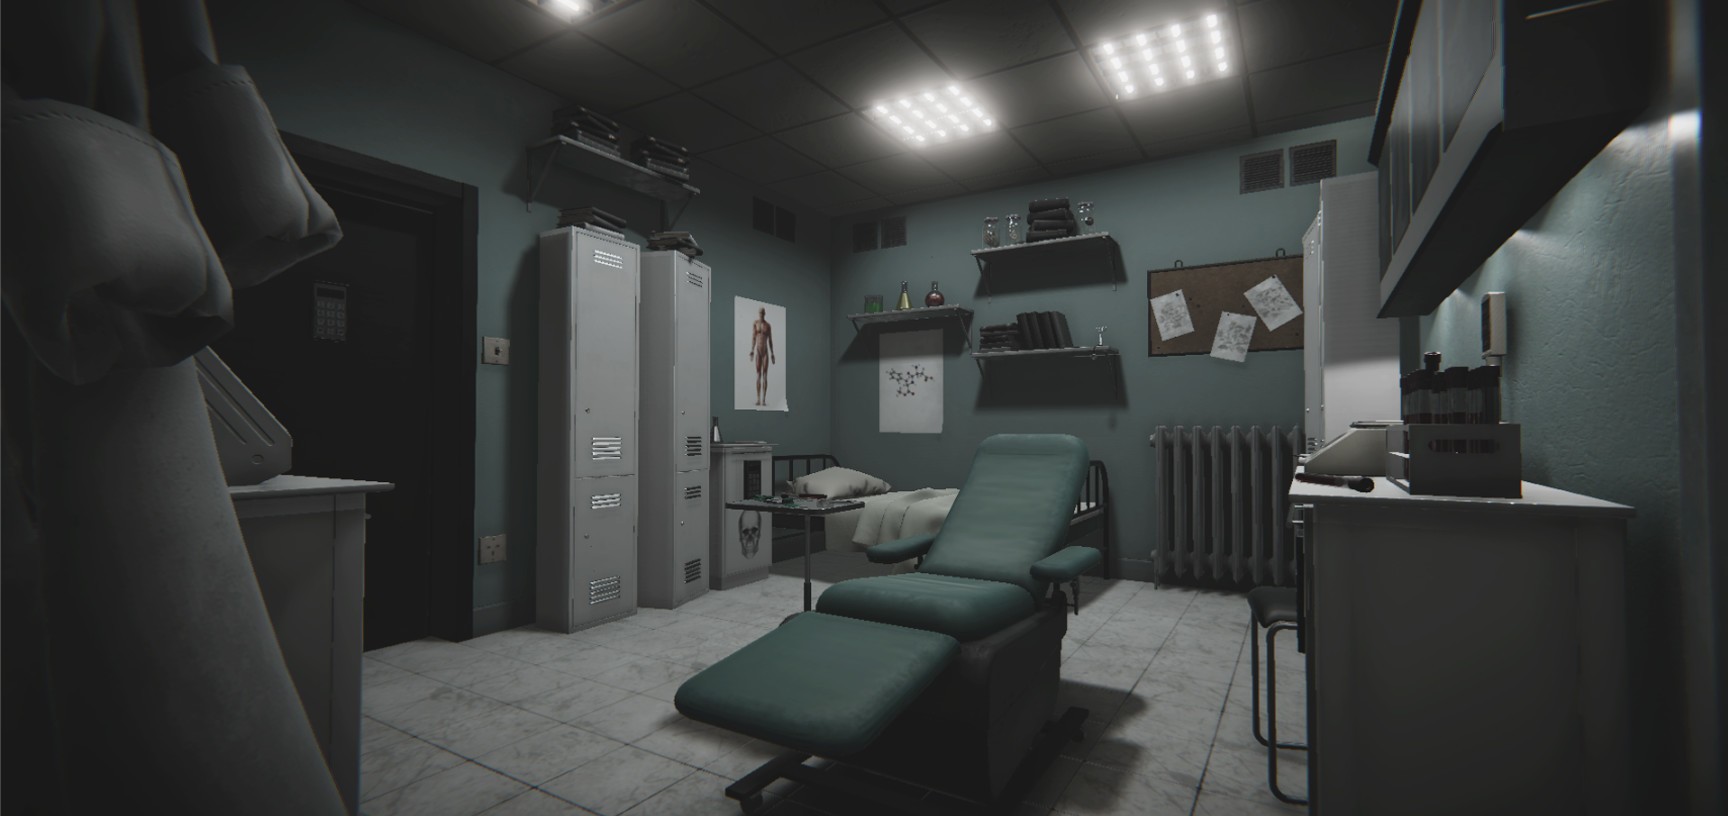 Room gameplay. Experiment Room. Mad Experiments 2: Escape Room. The Experiment Escape Room VR скрины.